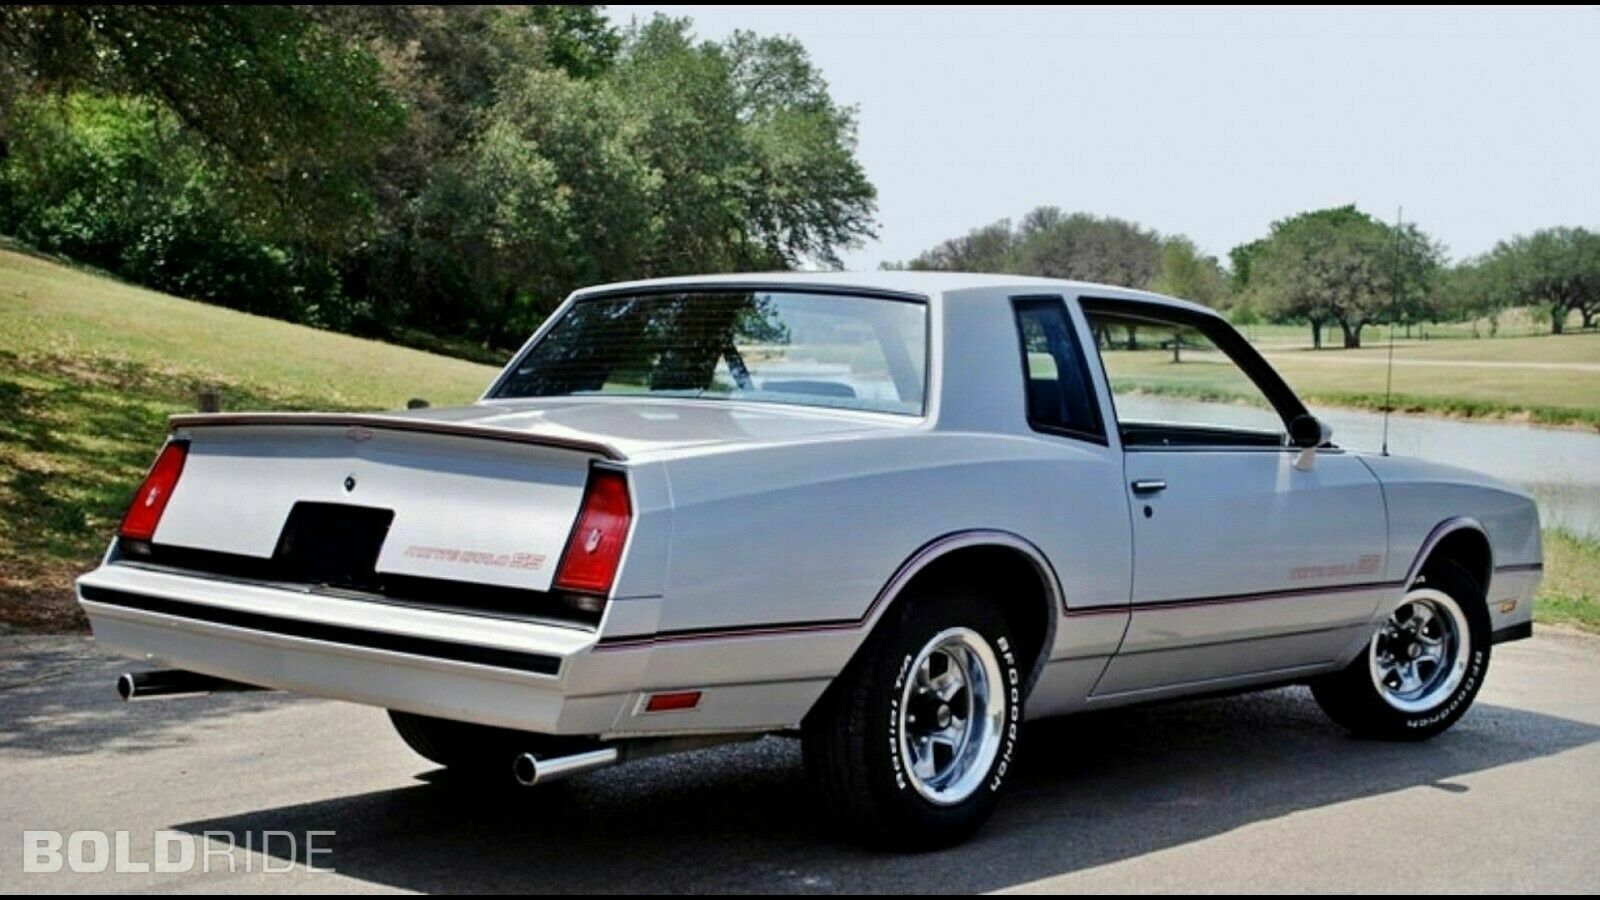 1985 CHEVY MONTE CARLO SS (grey) POSTER 24 X 36 INCH - $21.77